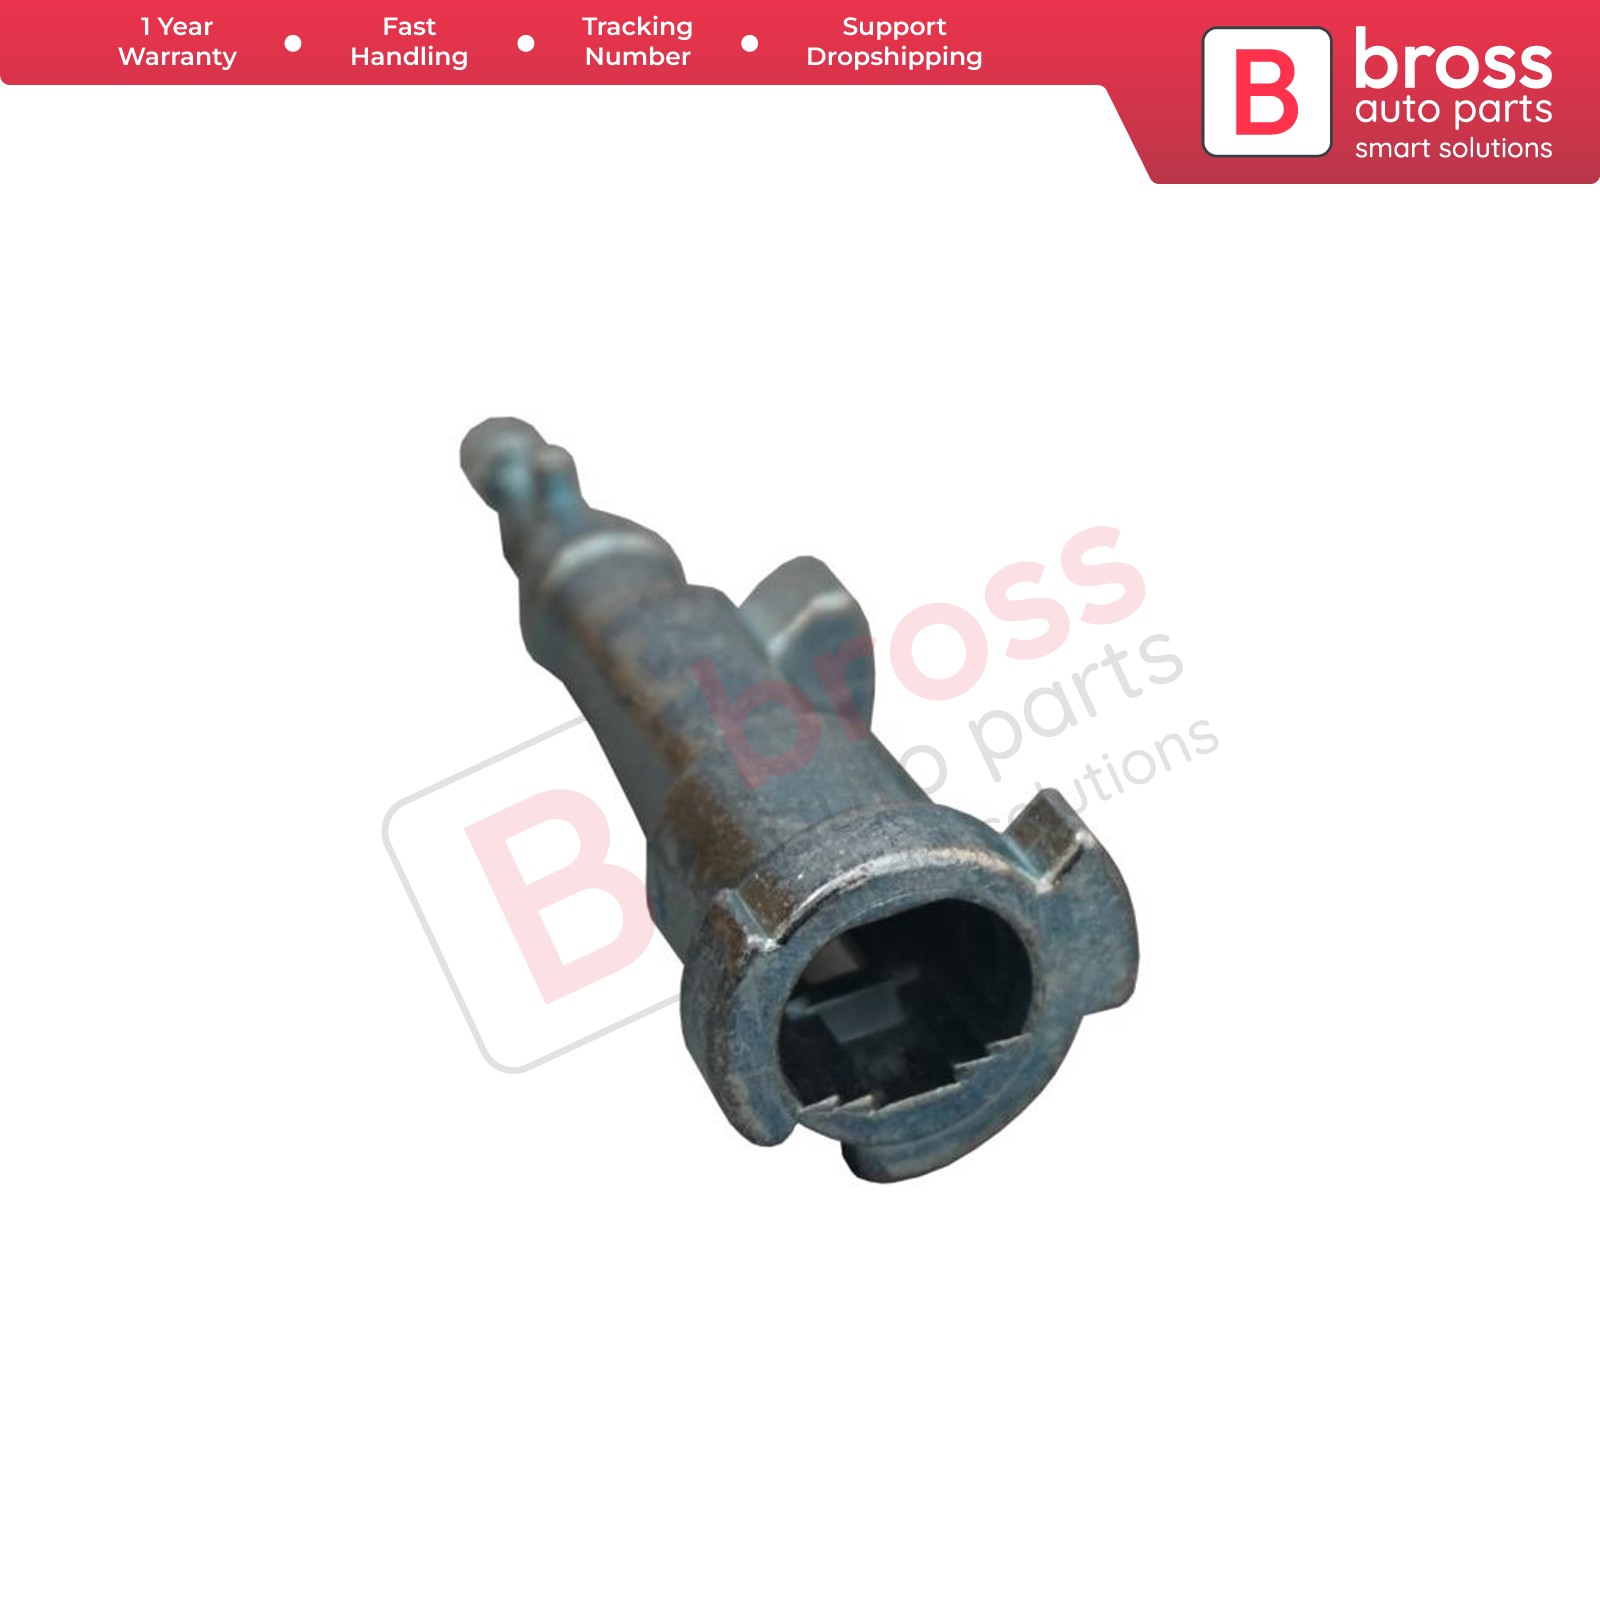 Bross BSP616 Ignition Lock Cylinder Shaft For Chevrolet Captiva 2006-On Bross Auto Parts 